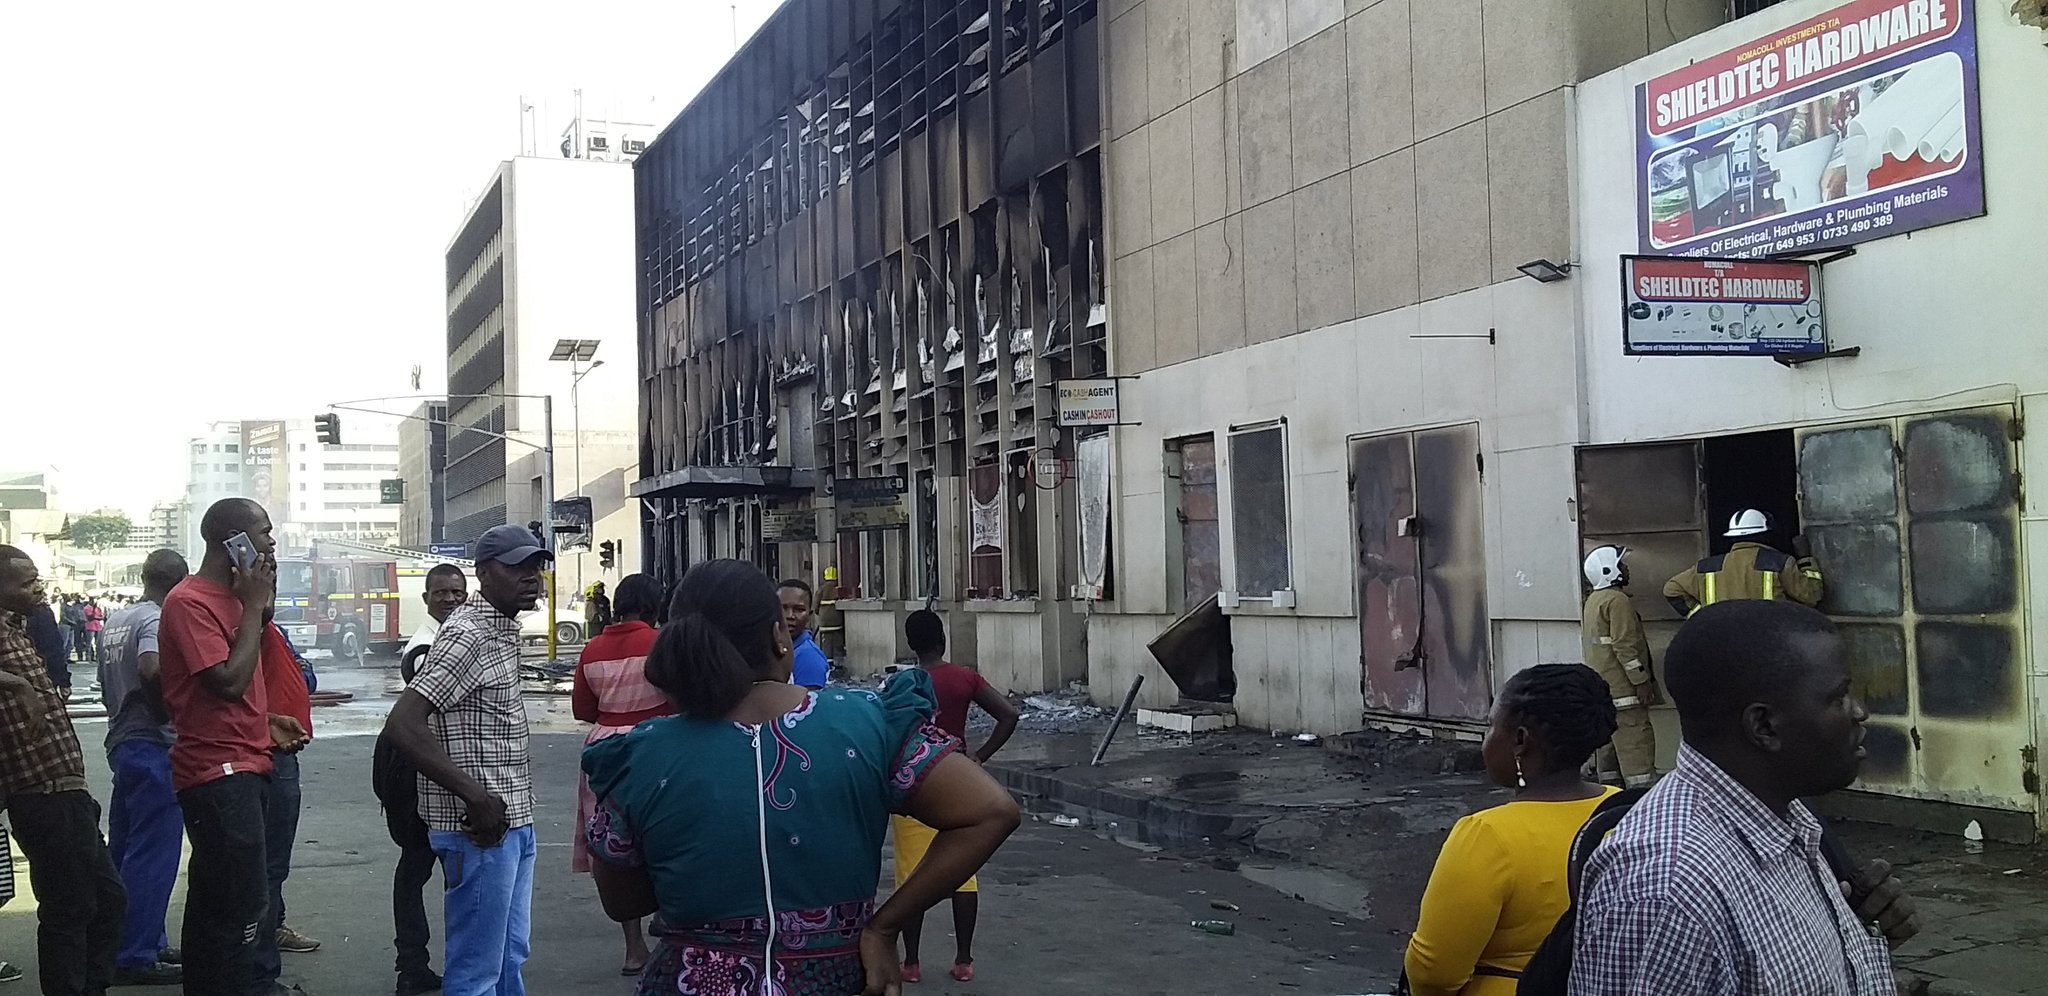 Building on corner Robert Mugabe and Chinhoyi gutted by fire